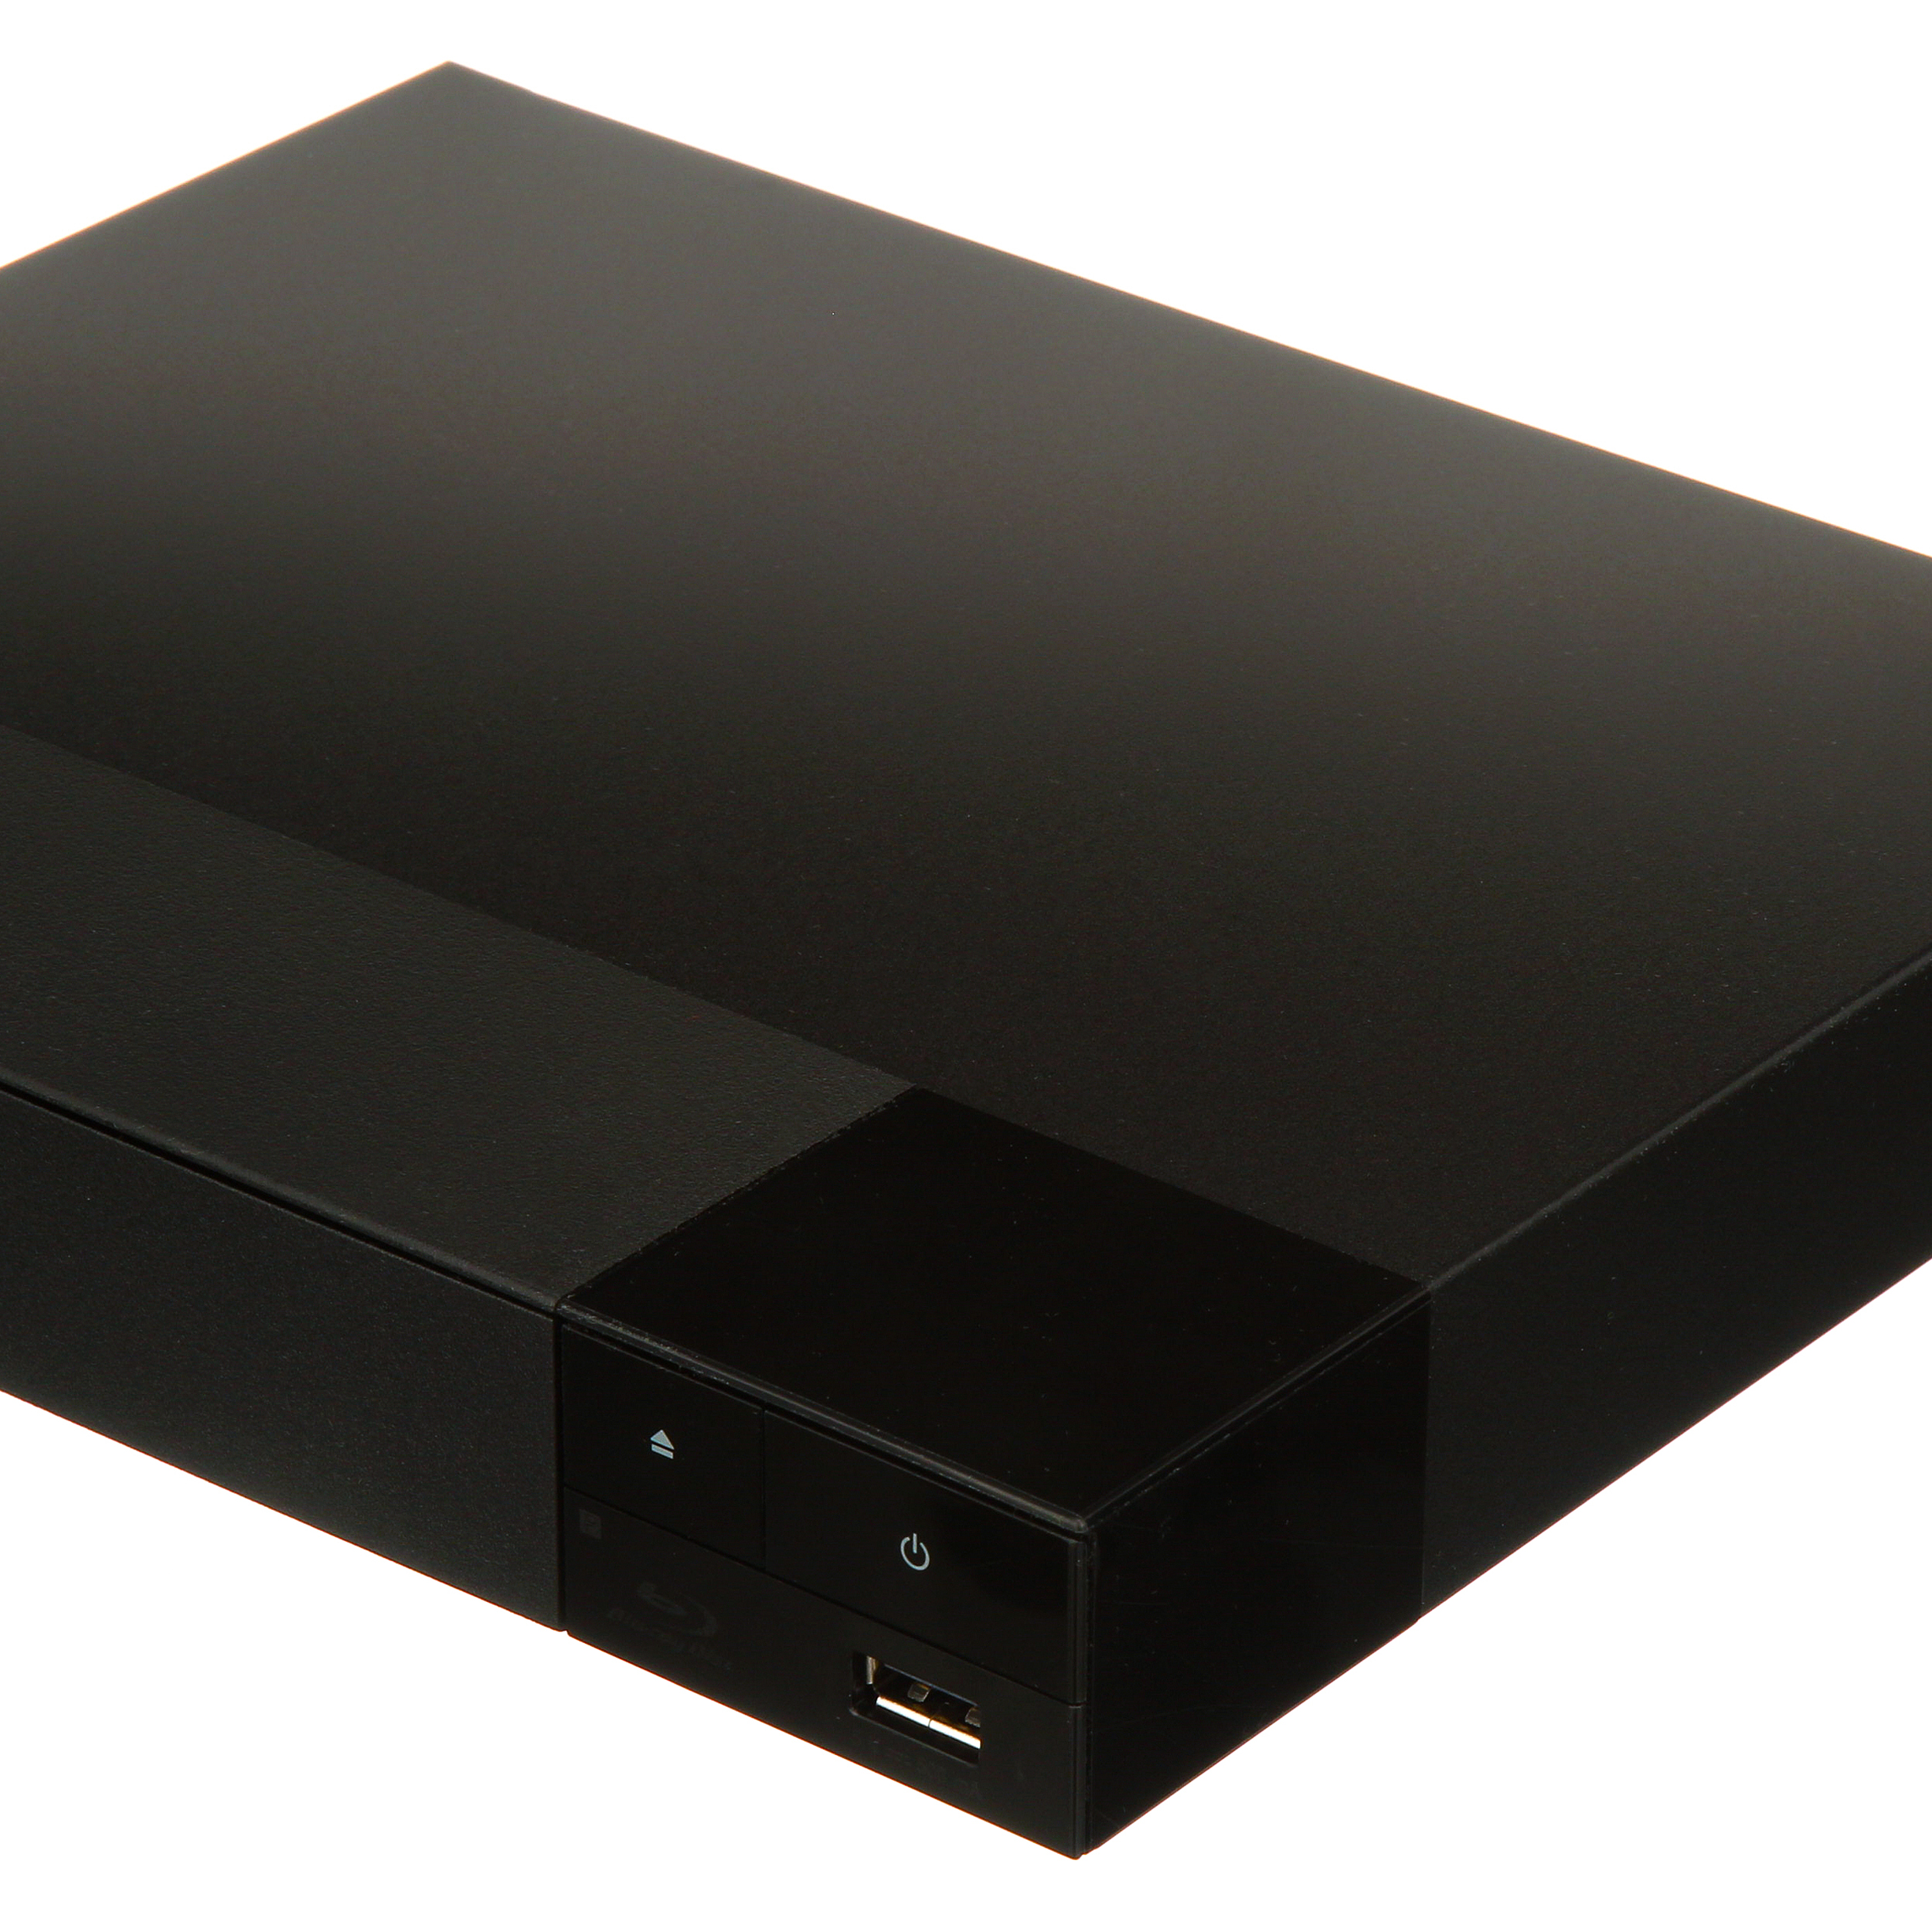 Sony BDP-S3700 Full HD Steaming Blu-ray DVD Player with built-in Wi-Fi, Dolby Digital TrueHD/DTS, and DVD upscaling - image 3 of 9